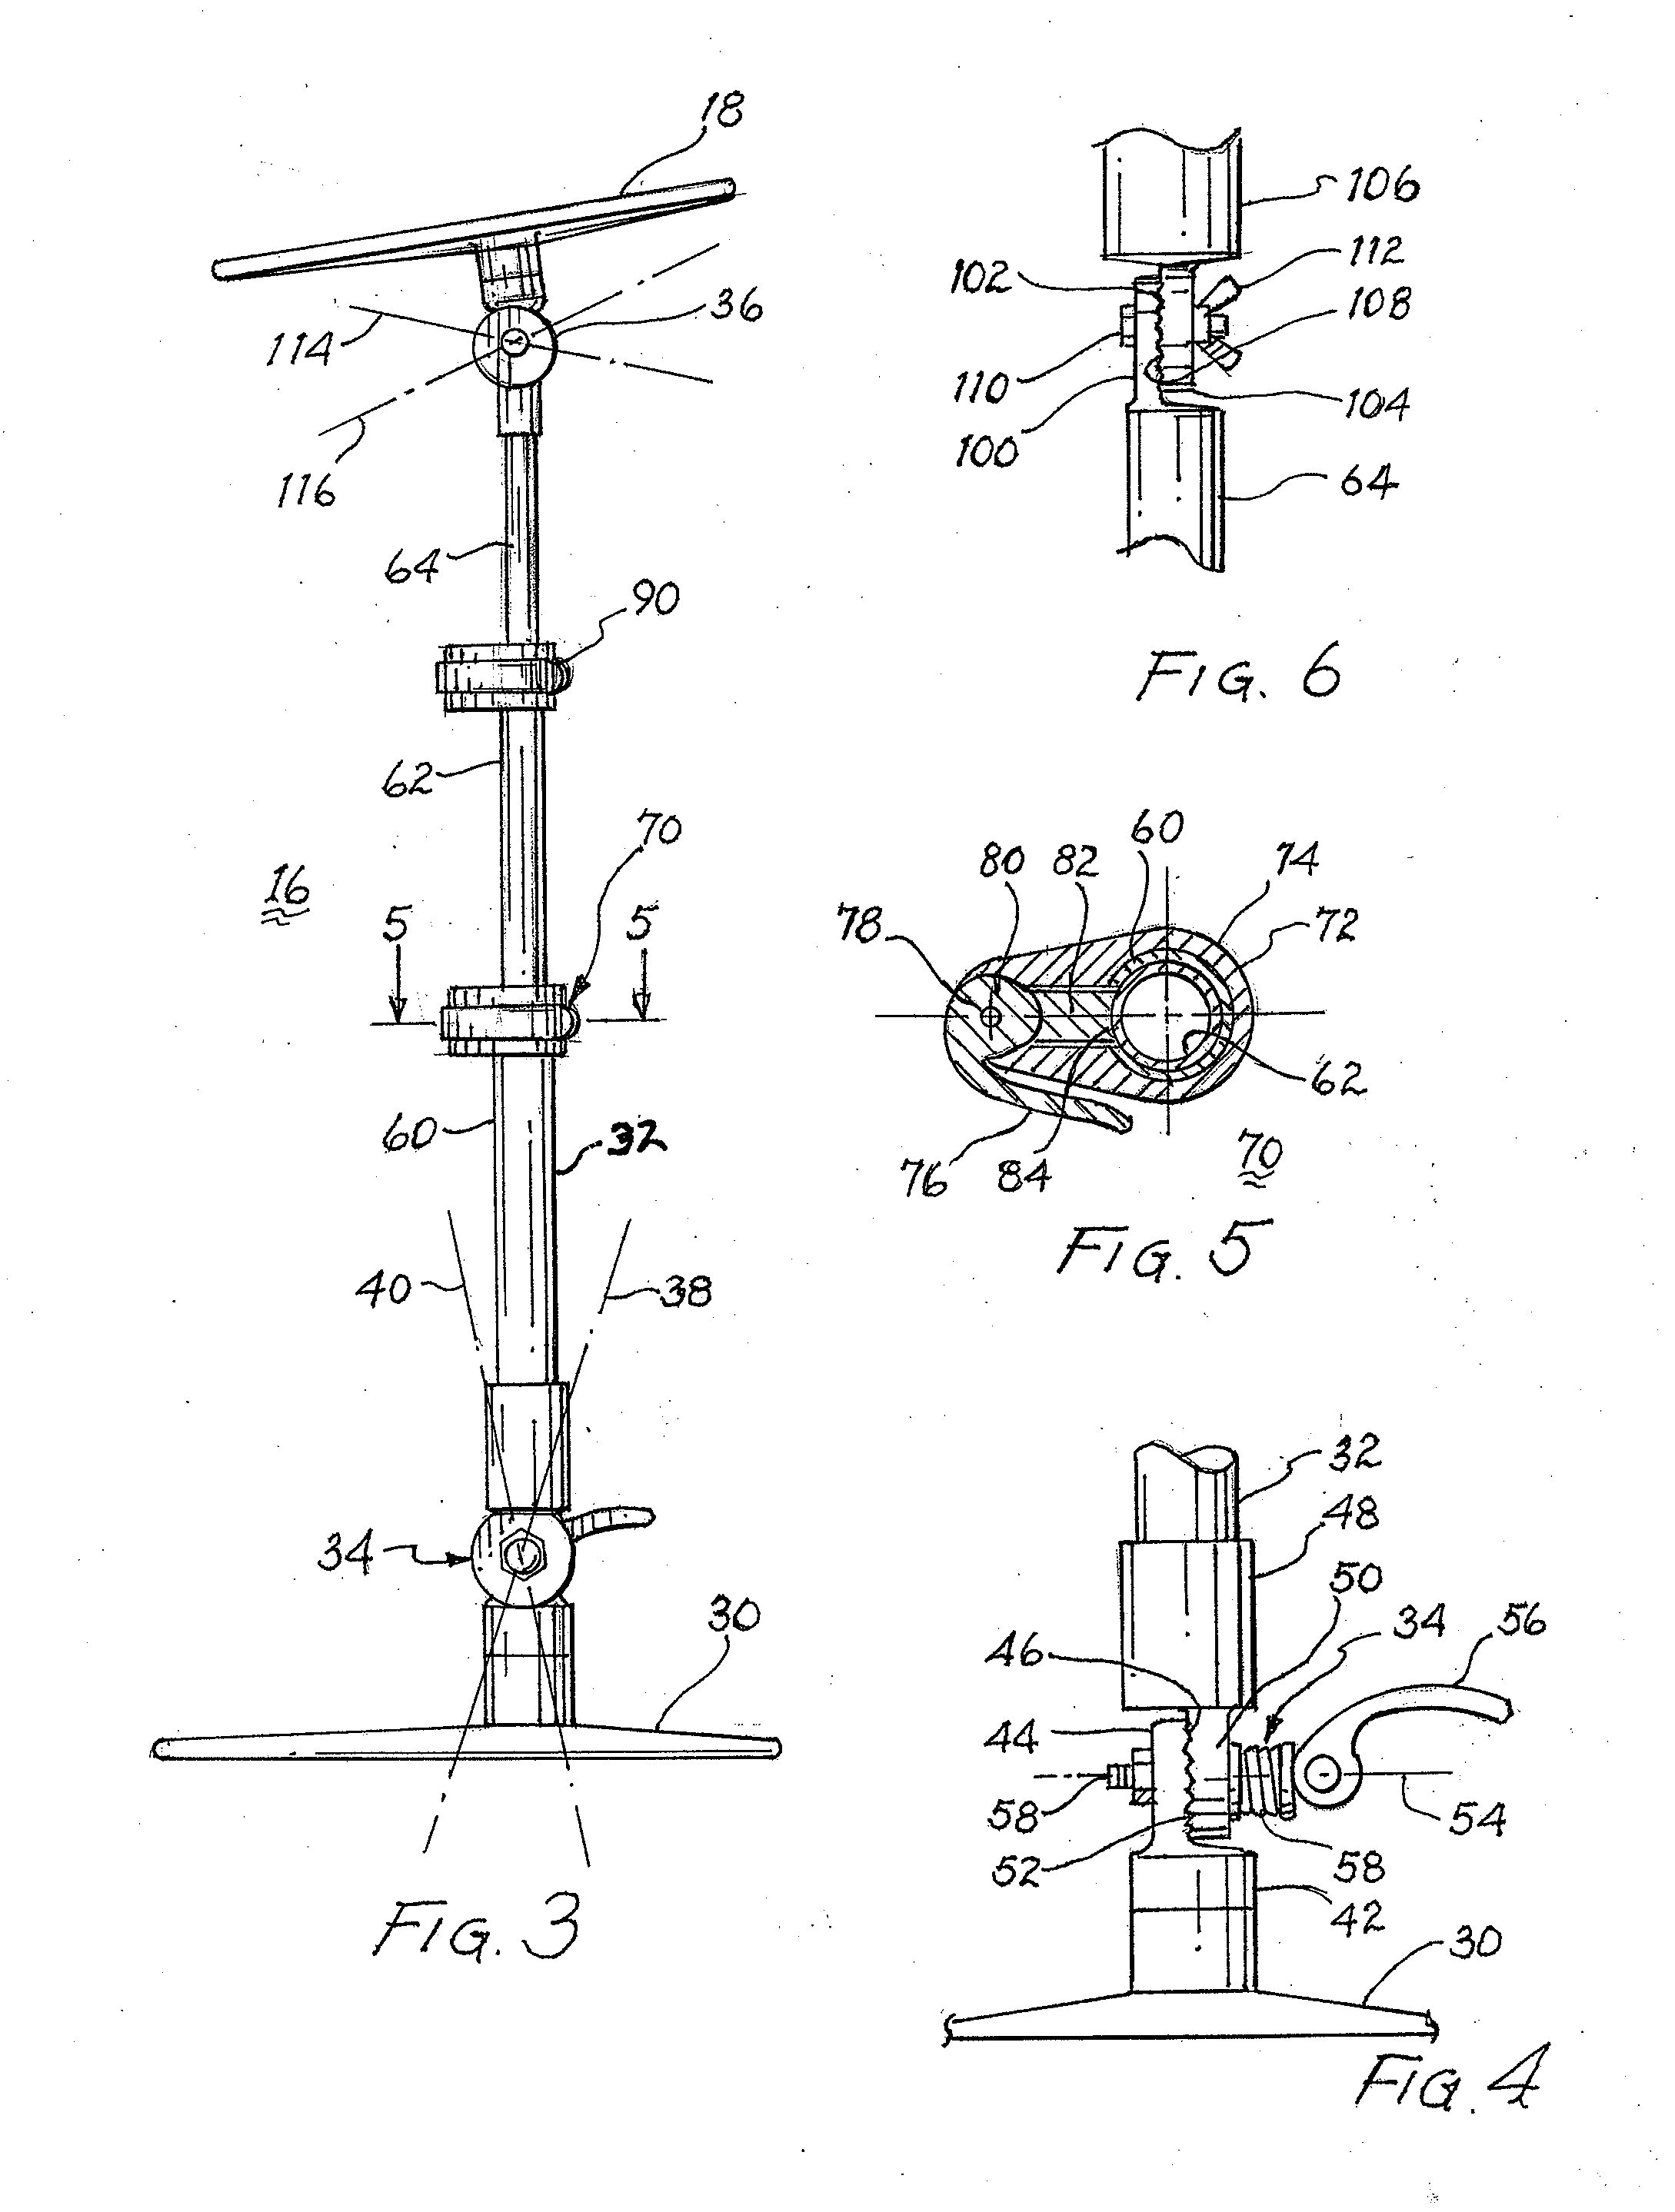 Headrest and work surface apparatus